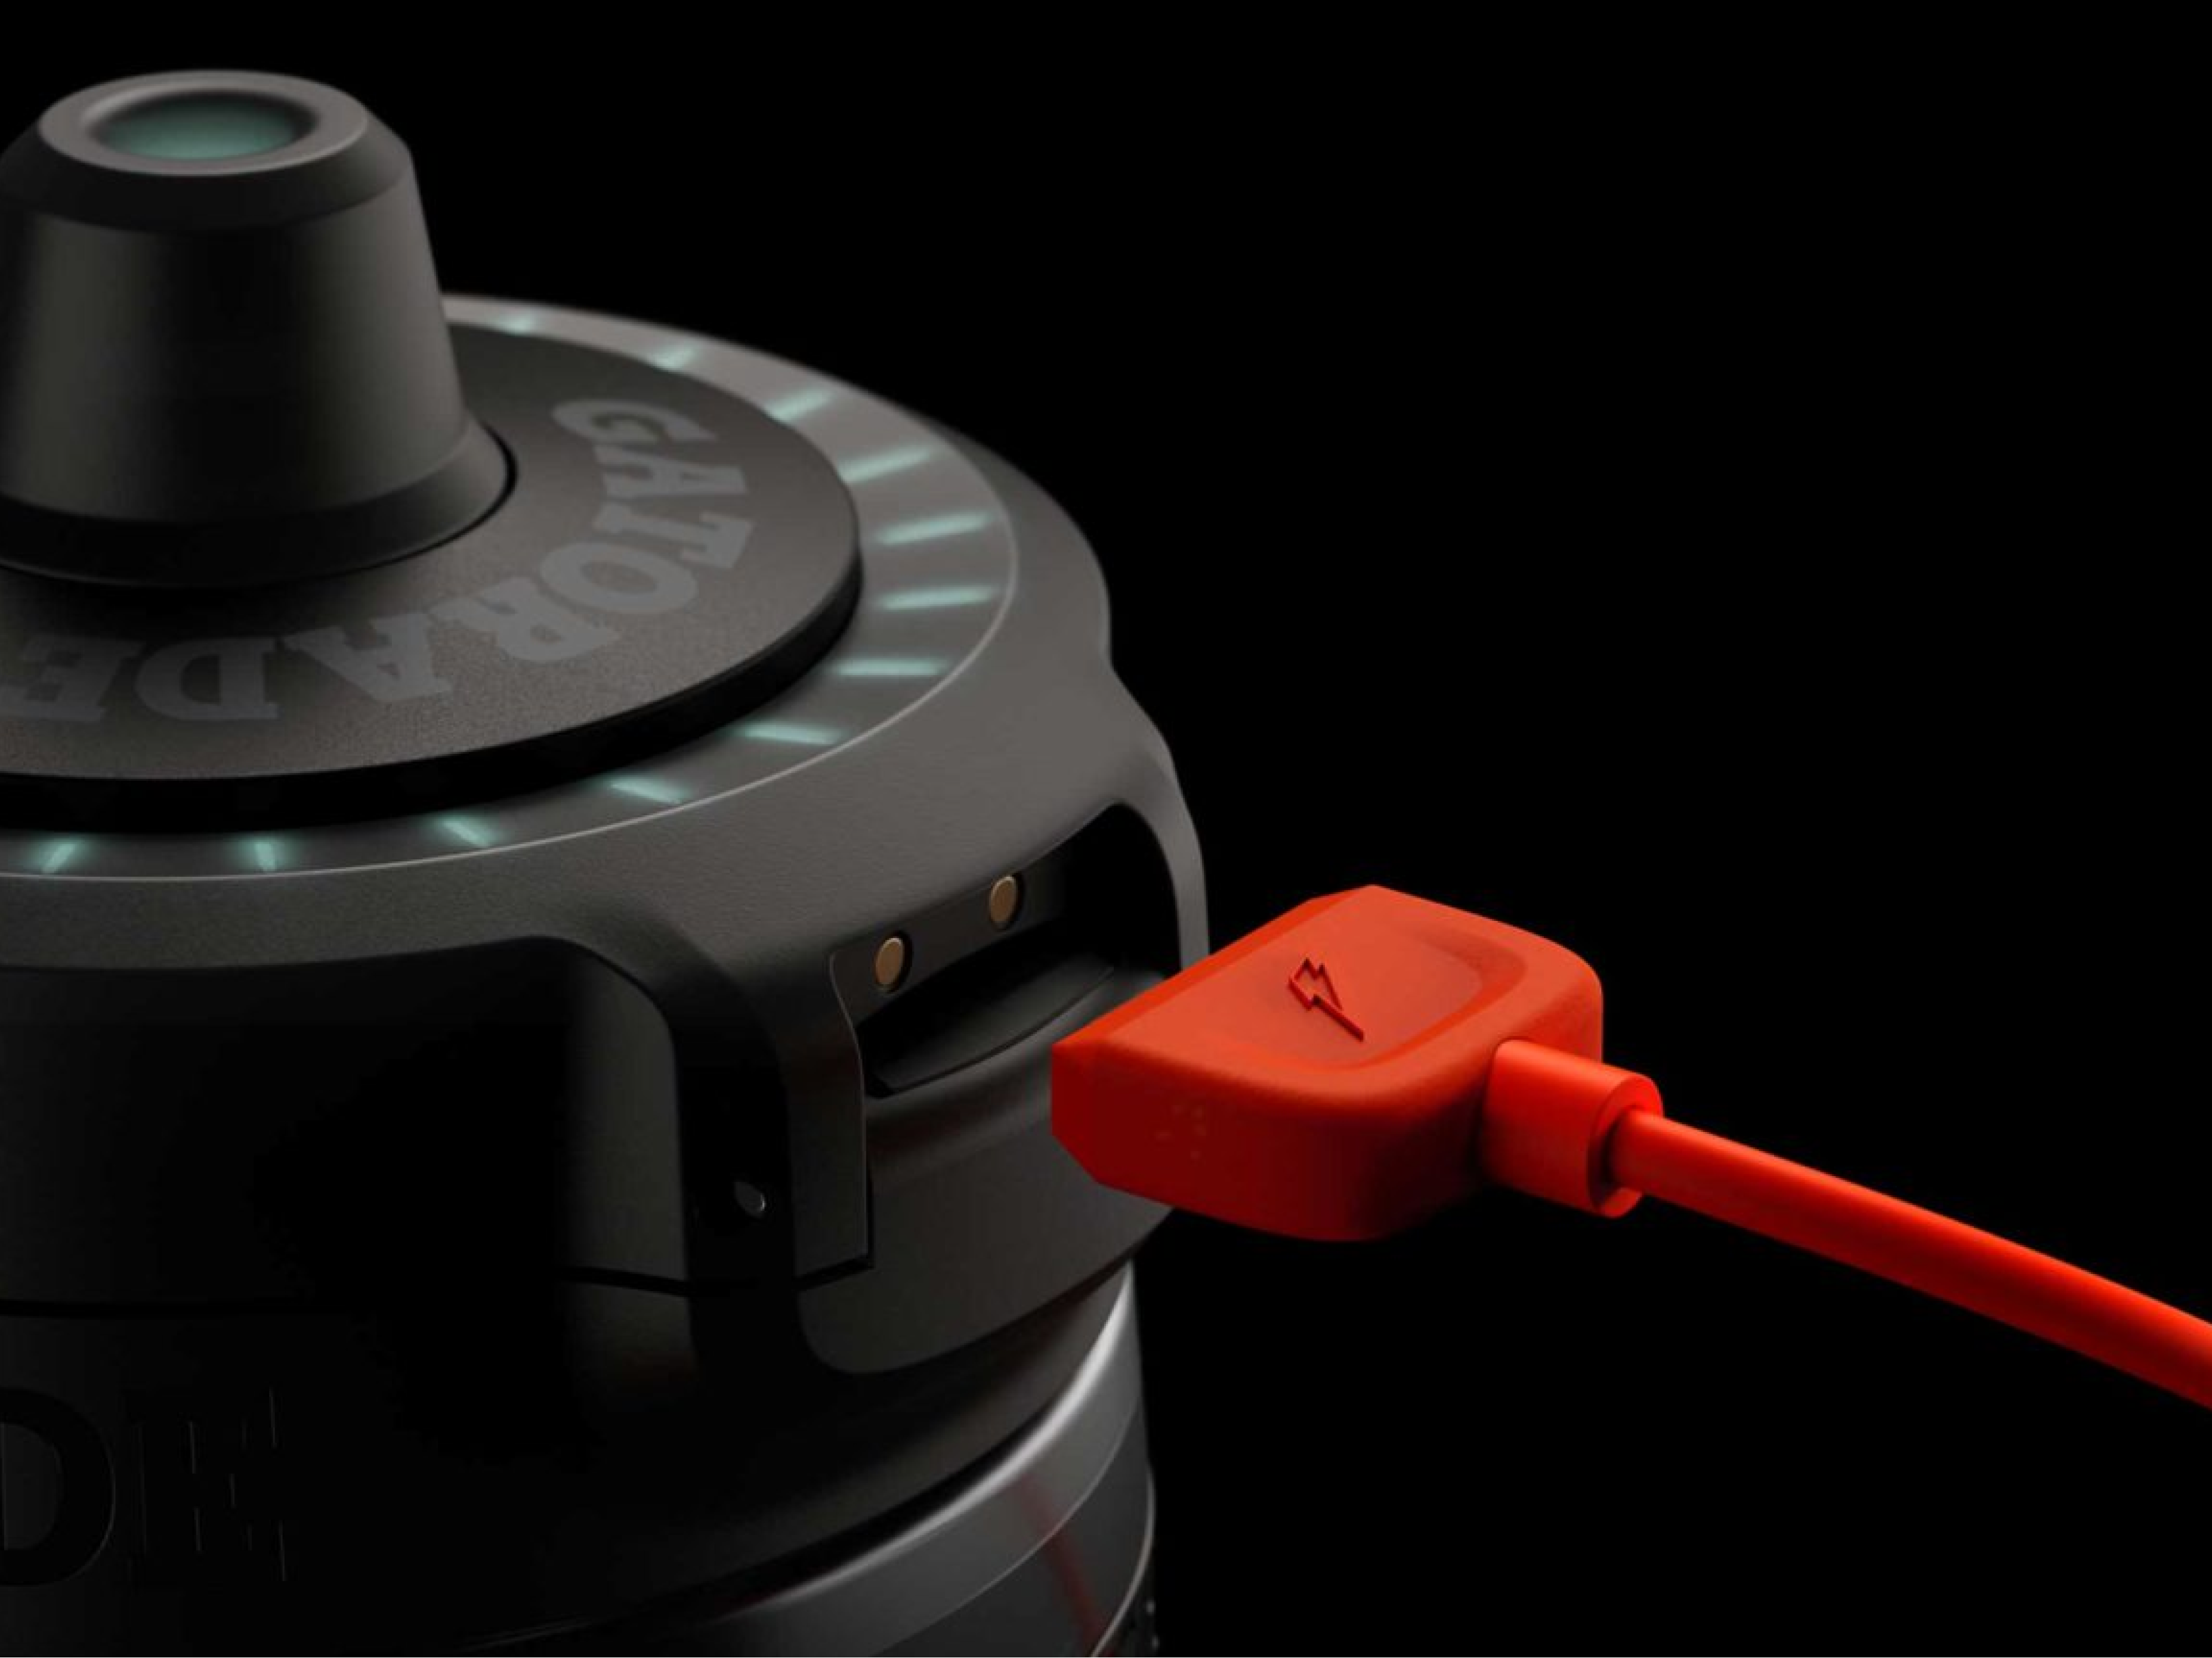 Charger plugging into Gatorade Smart Gx Bottle